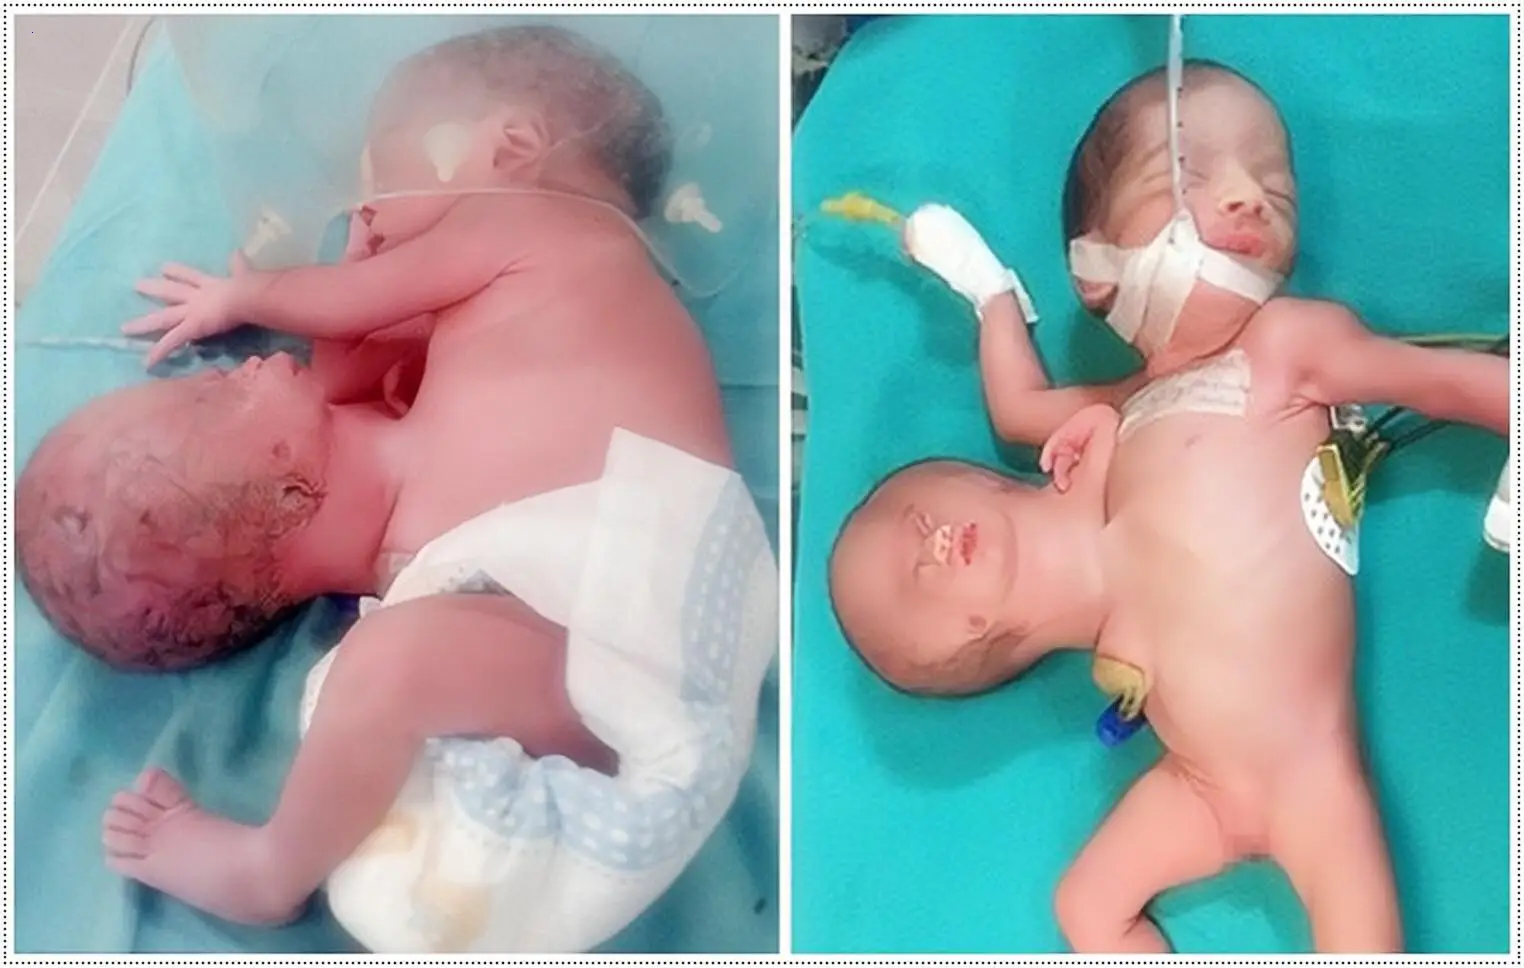 The two-headed newborn boy evokes medical puzzles and cautious optimism for his future